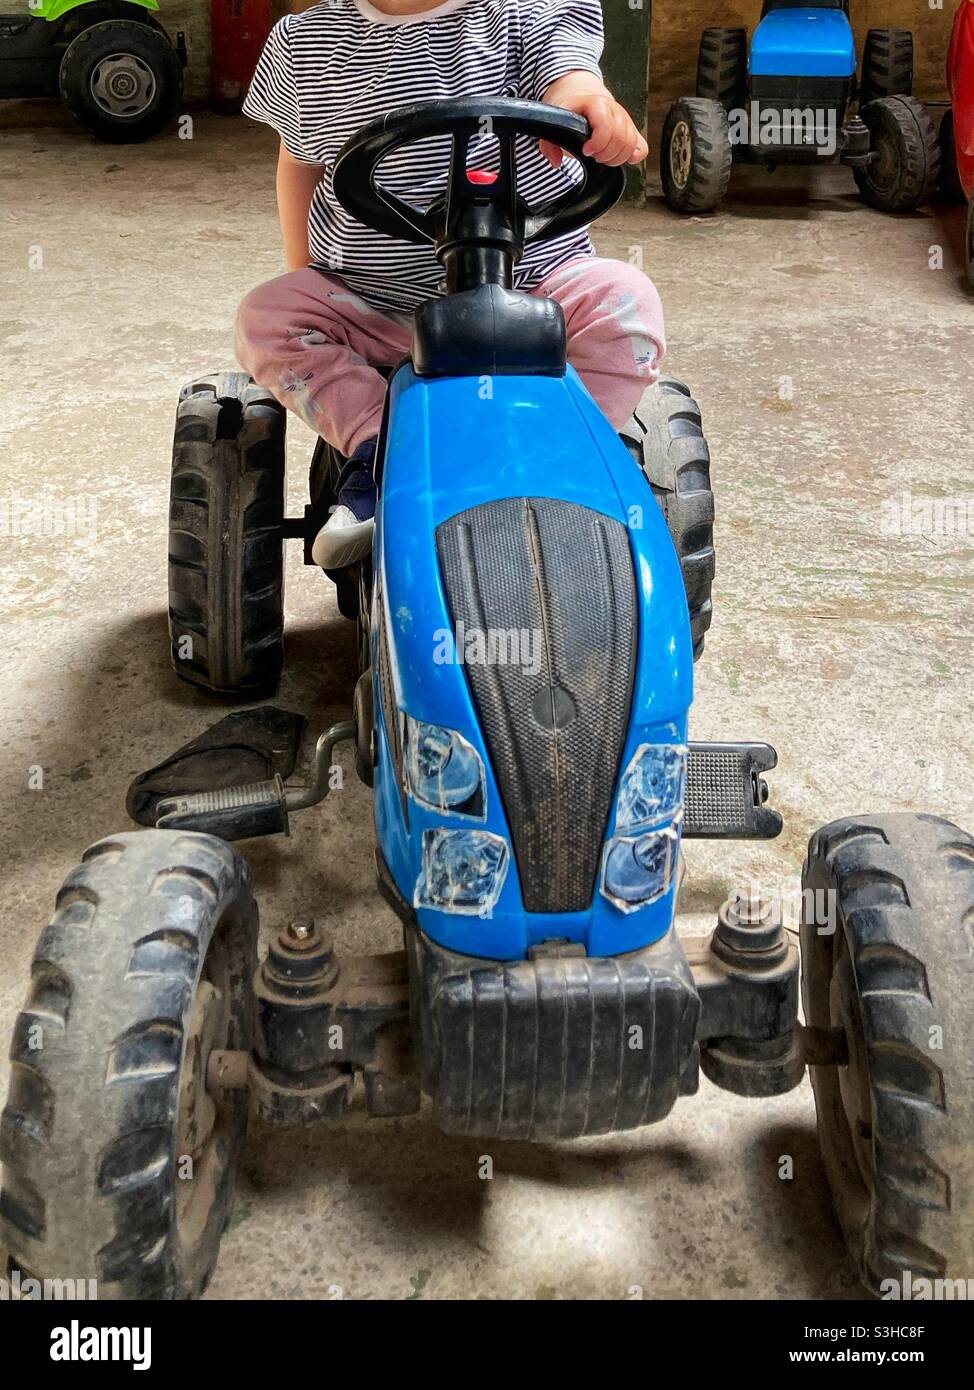 Child on toy tractor Stock Photo